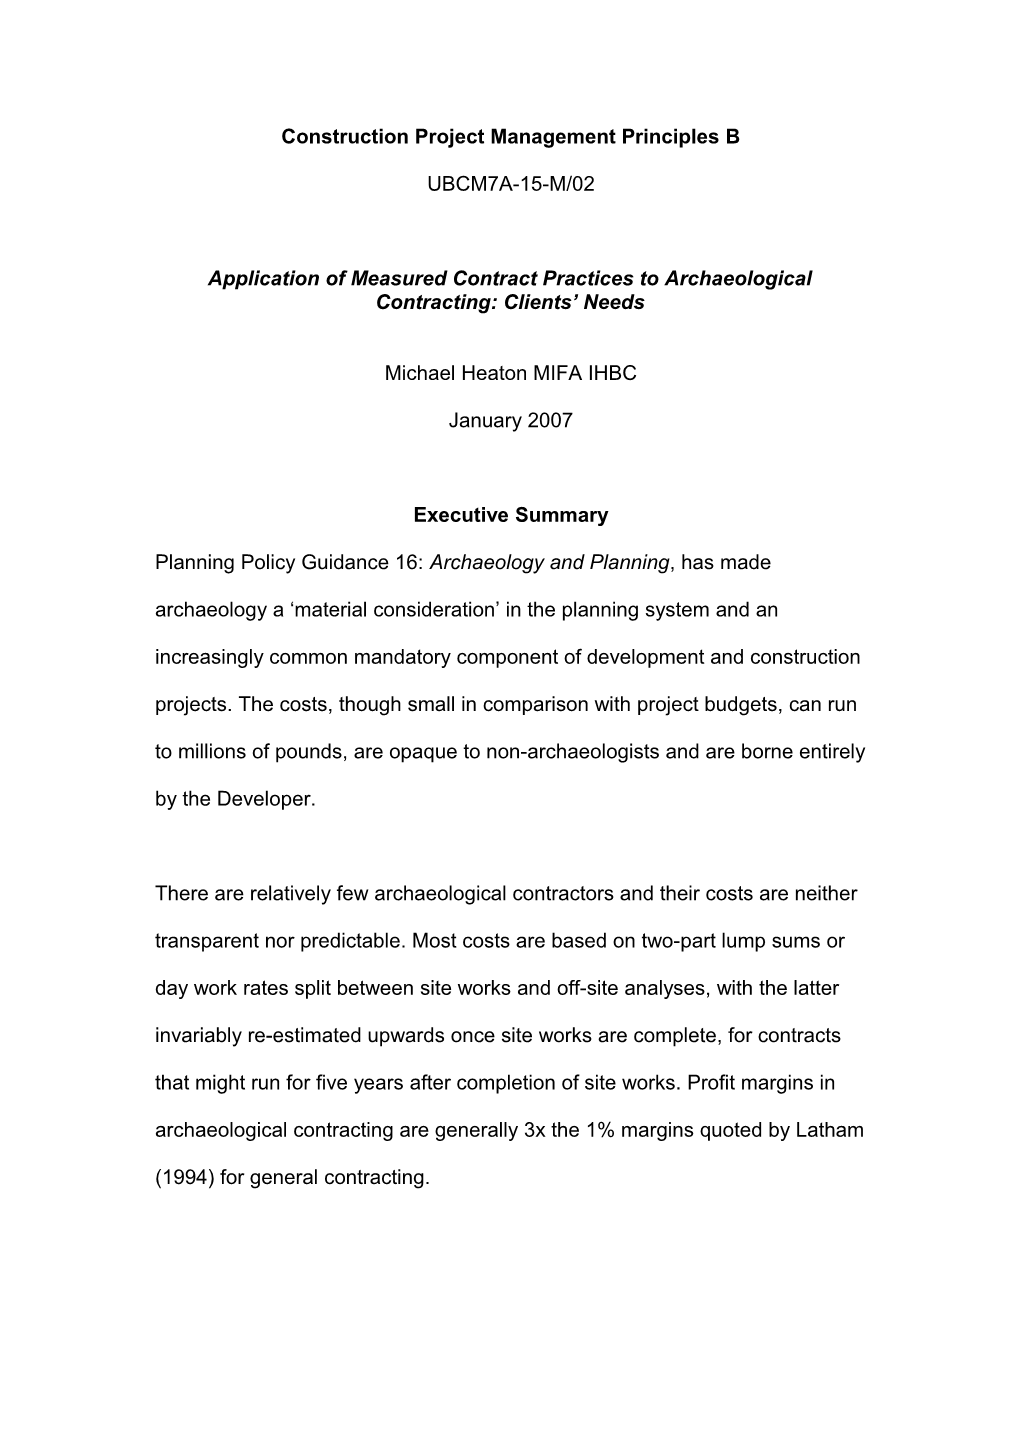 Application of Measured Contract Practices to Archaeological Contracting: the Clients Needs